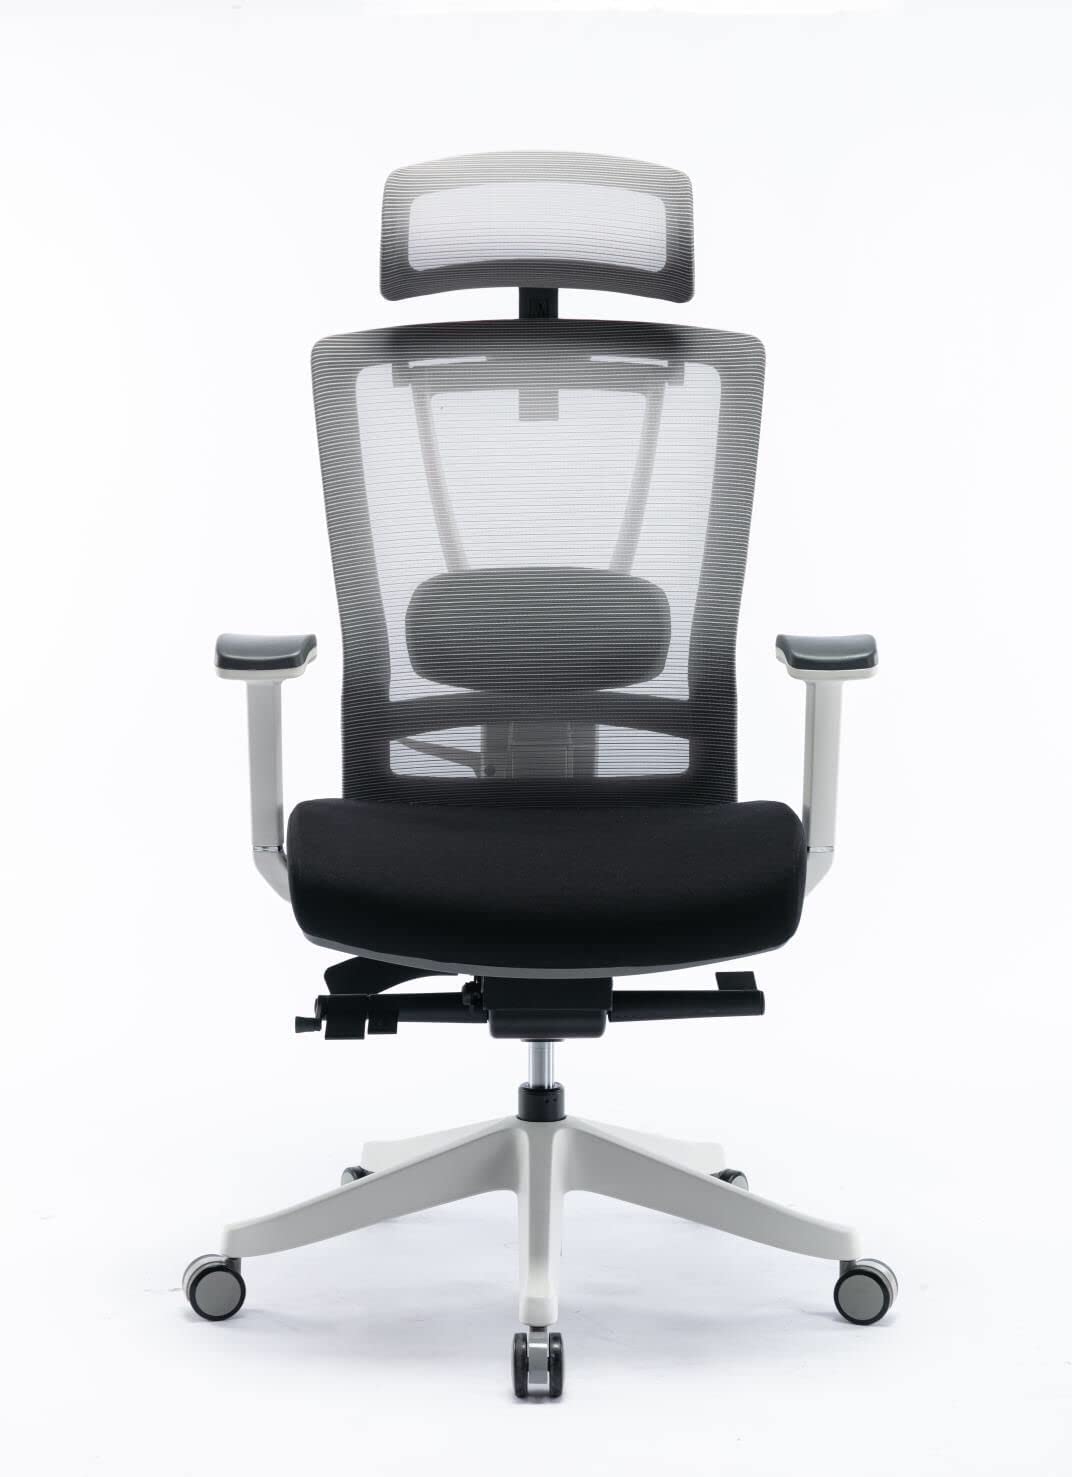 HALO Chair Premium Ergonomic Gaming & Office Chair with Multi Adjustable Features by Navodesk Black & White